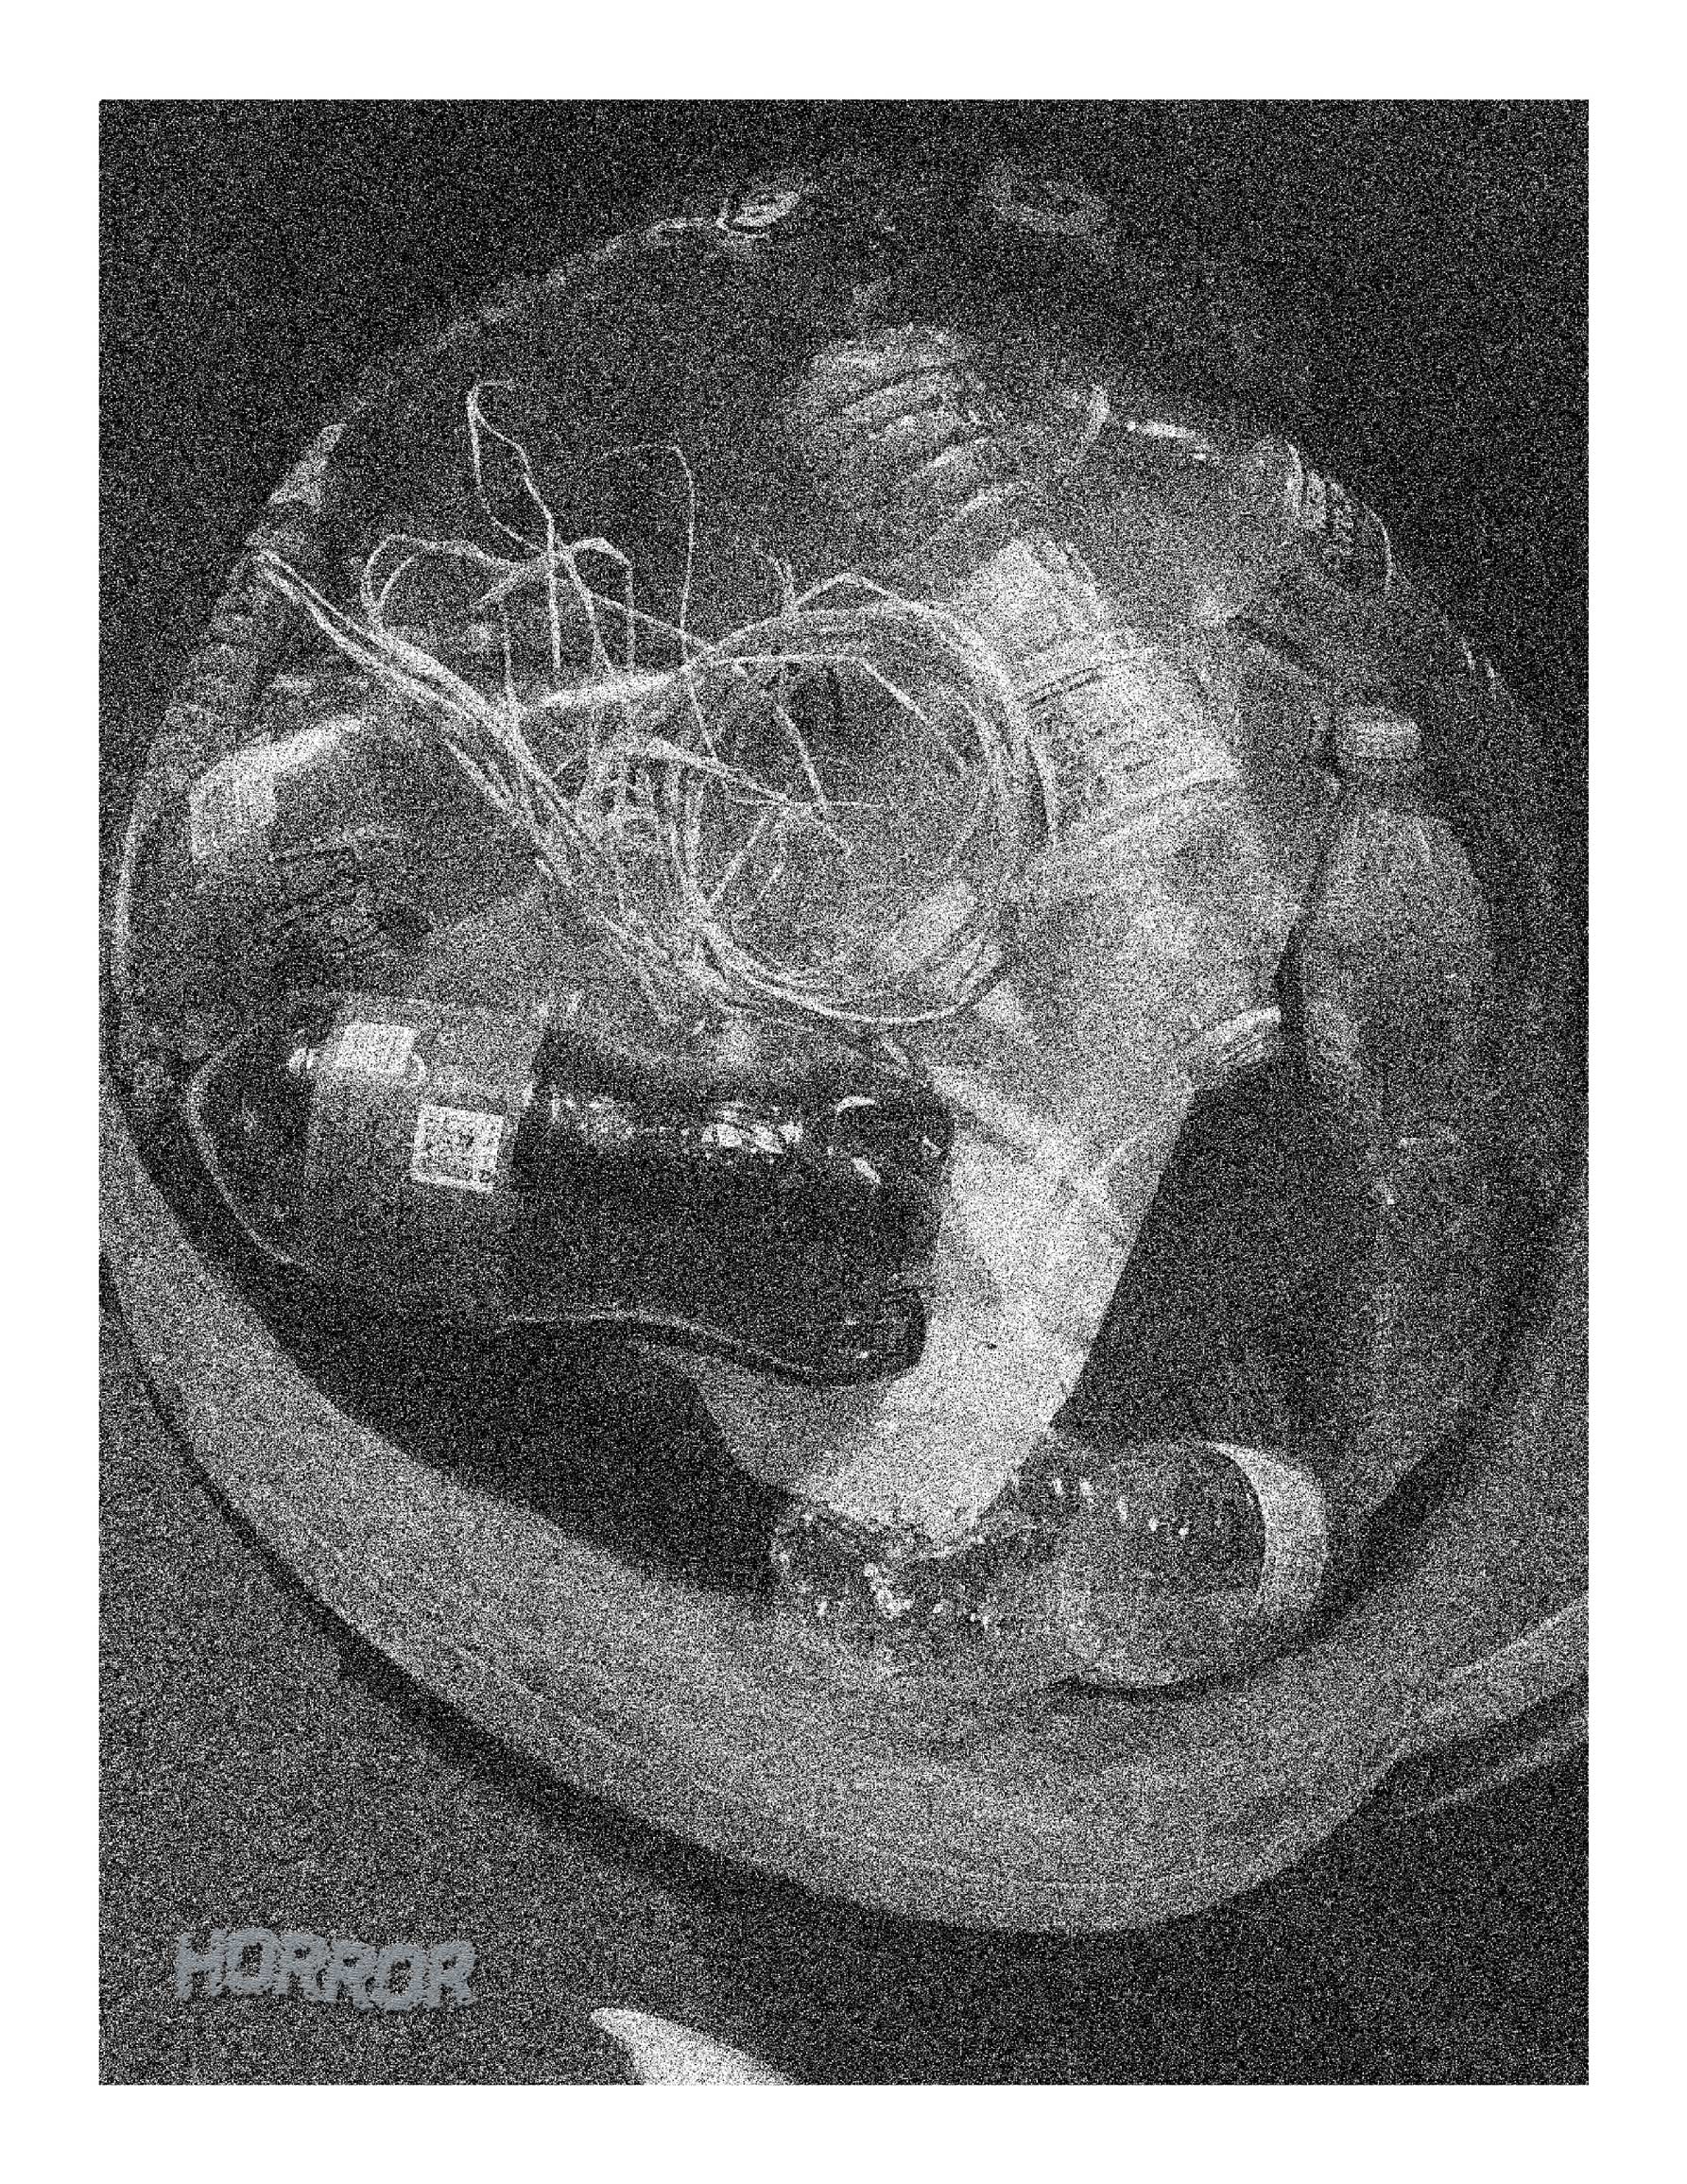 A grainy black and white print looking into the top of a garbage bag piled up with different plastic bottles and string. The word "HORROR" appears in the lower left corner.